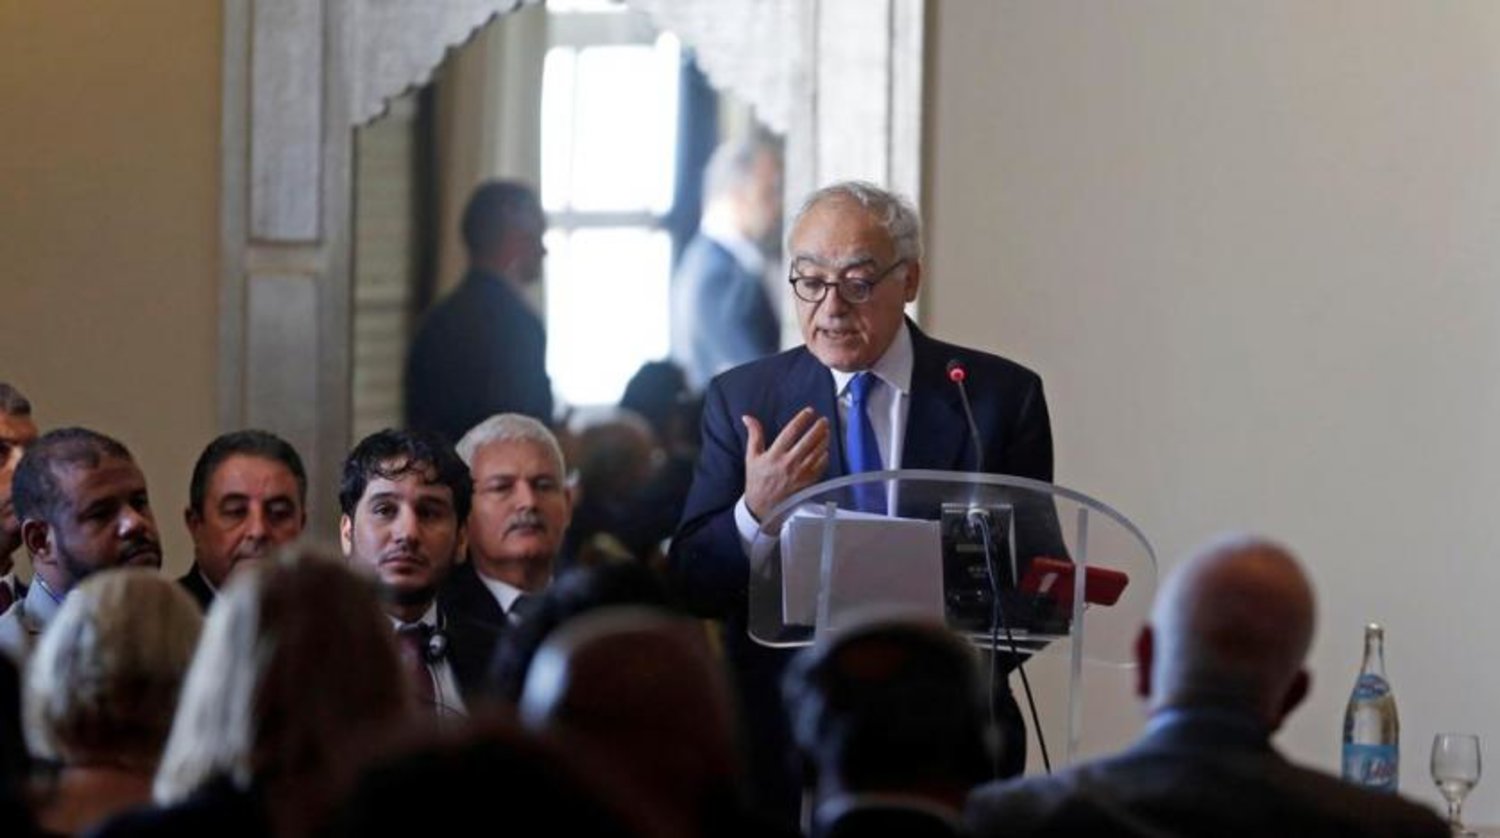 Ghassan  Salamé, UN envoy to Libya envoy, addresses members of Libya’s rival factions at a conference in Tunis, on September 26, 2017. PHOTO: Zoubeir Souissi / Reuters